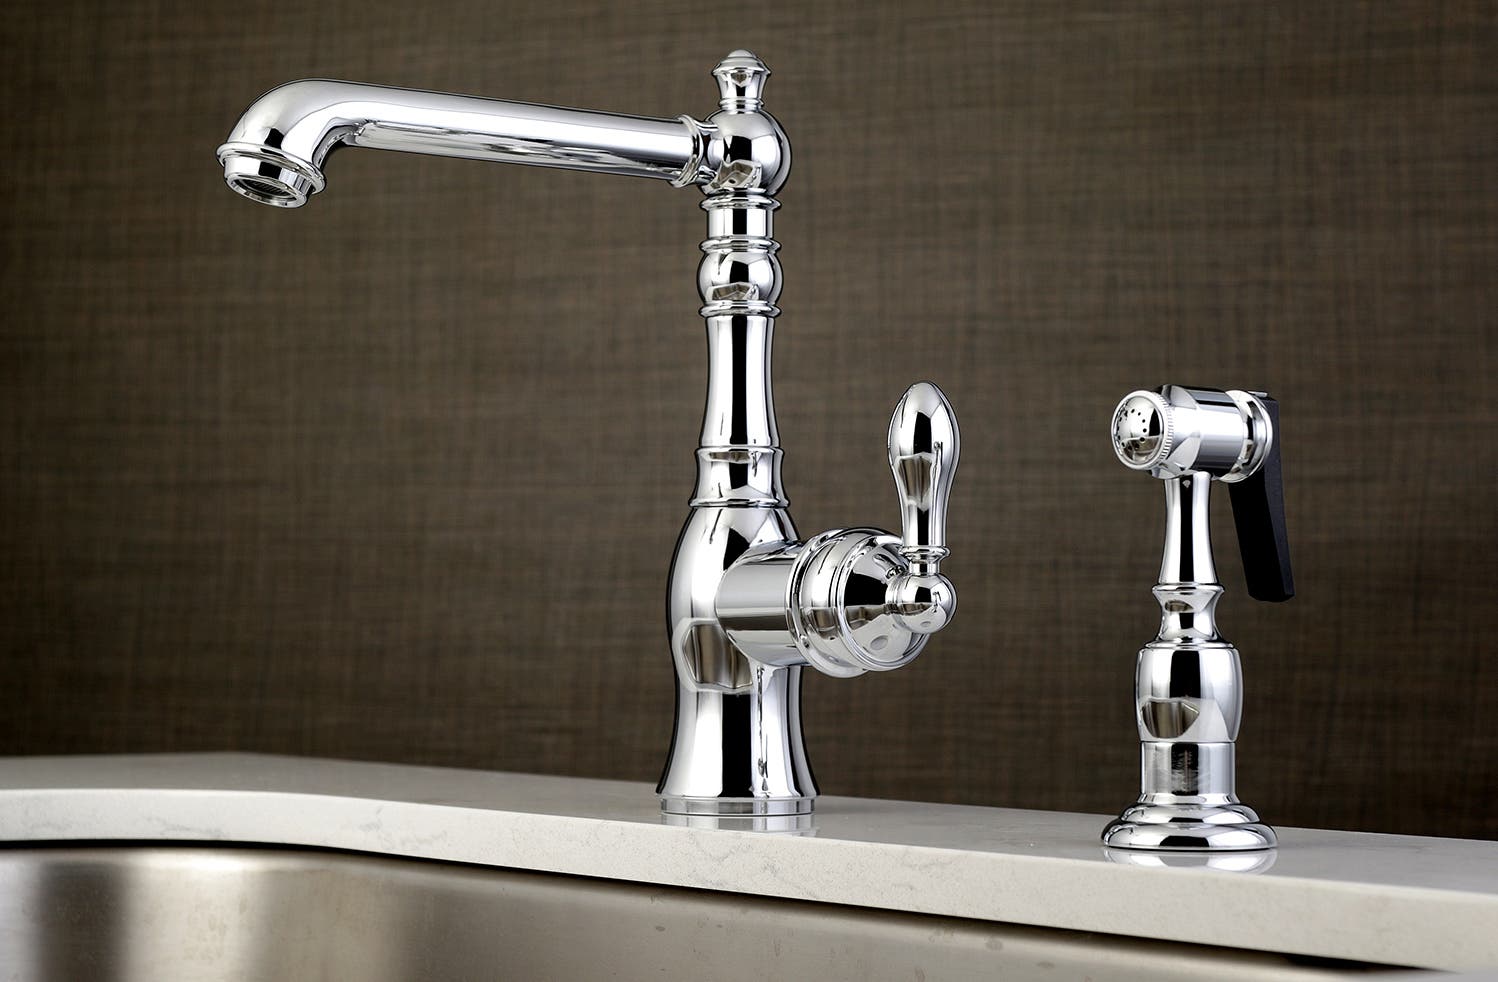 The American Classic Kitchen Faucet Brings Colonial Tradition to Light, GSY7201ACLBS